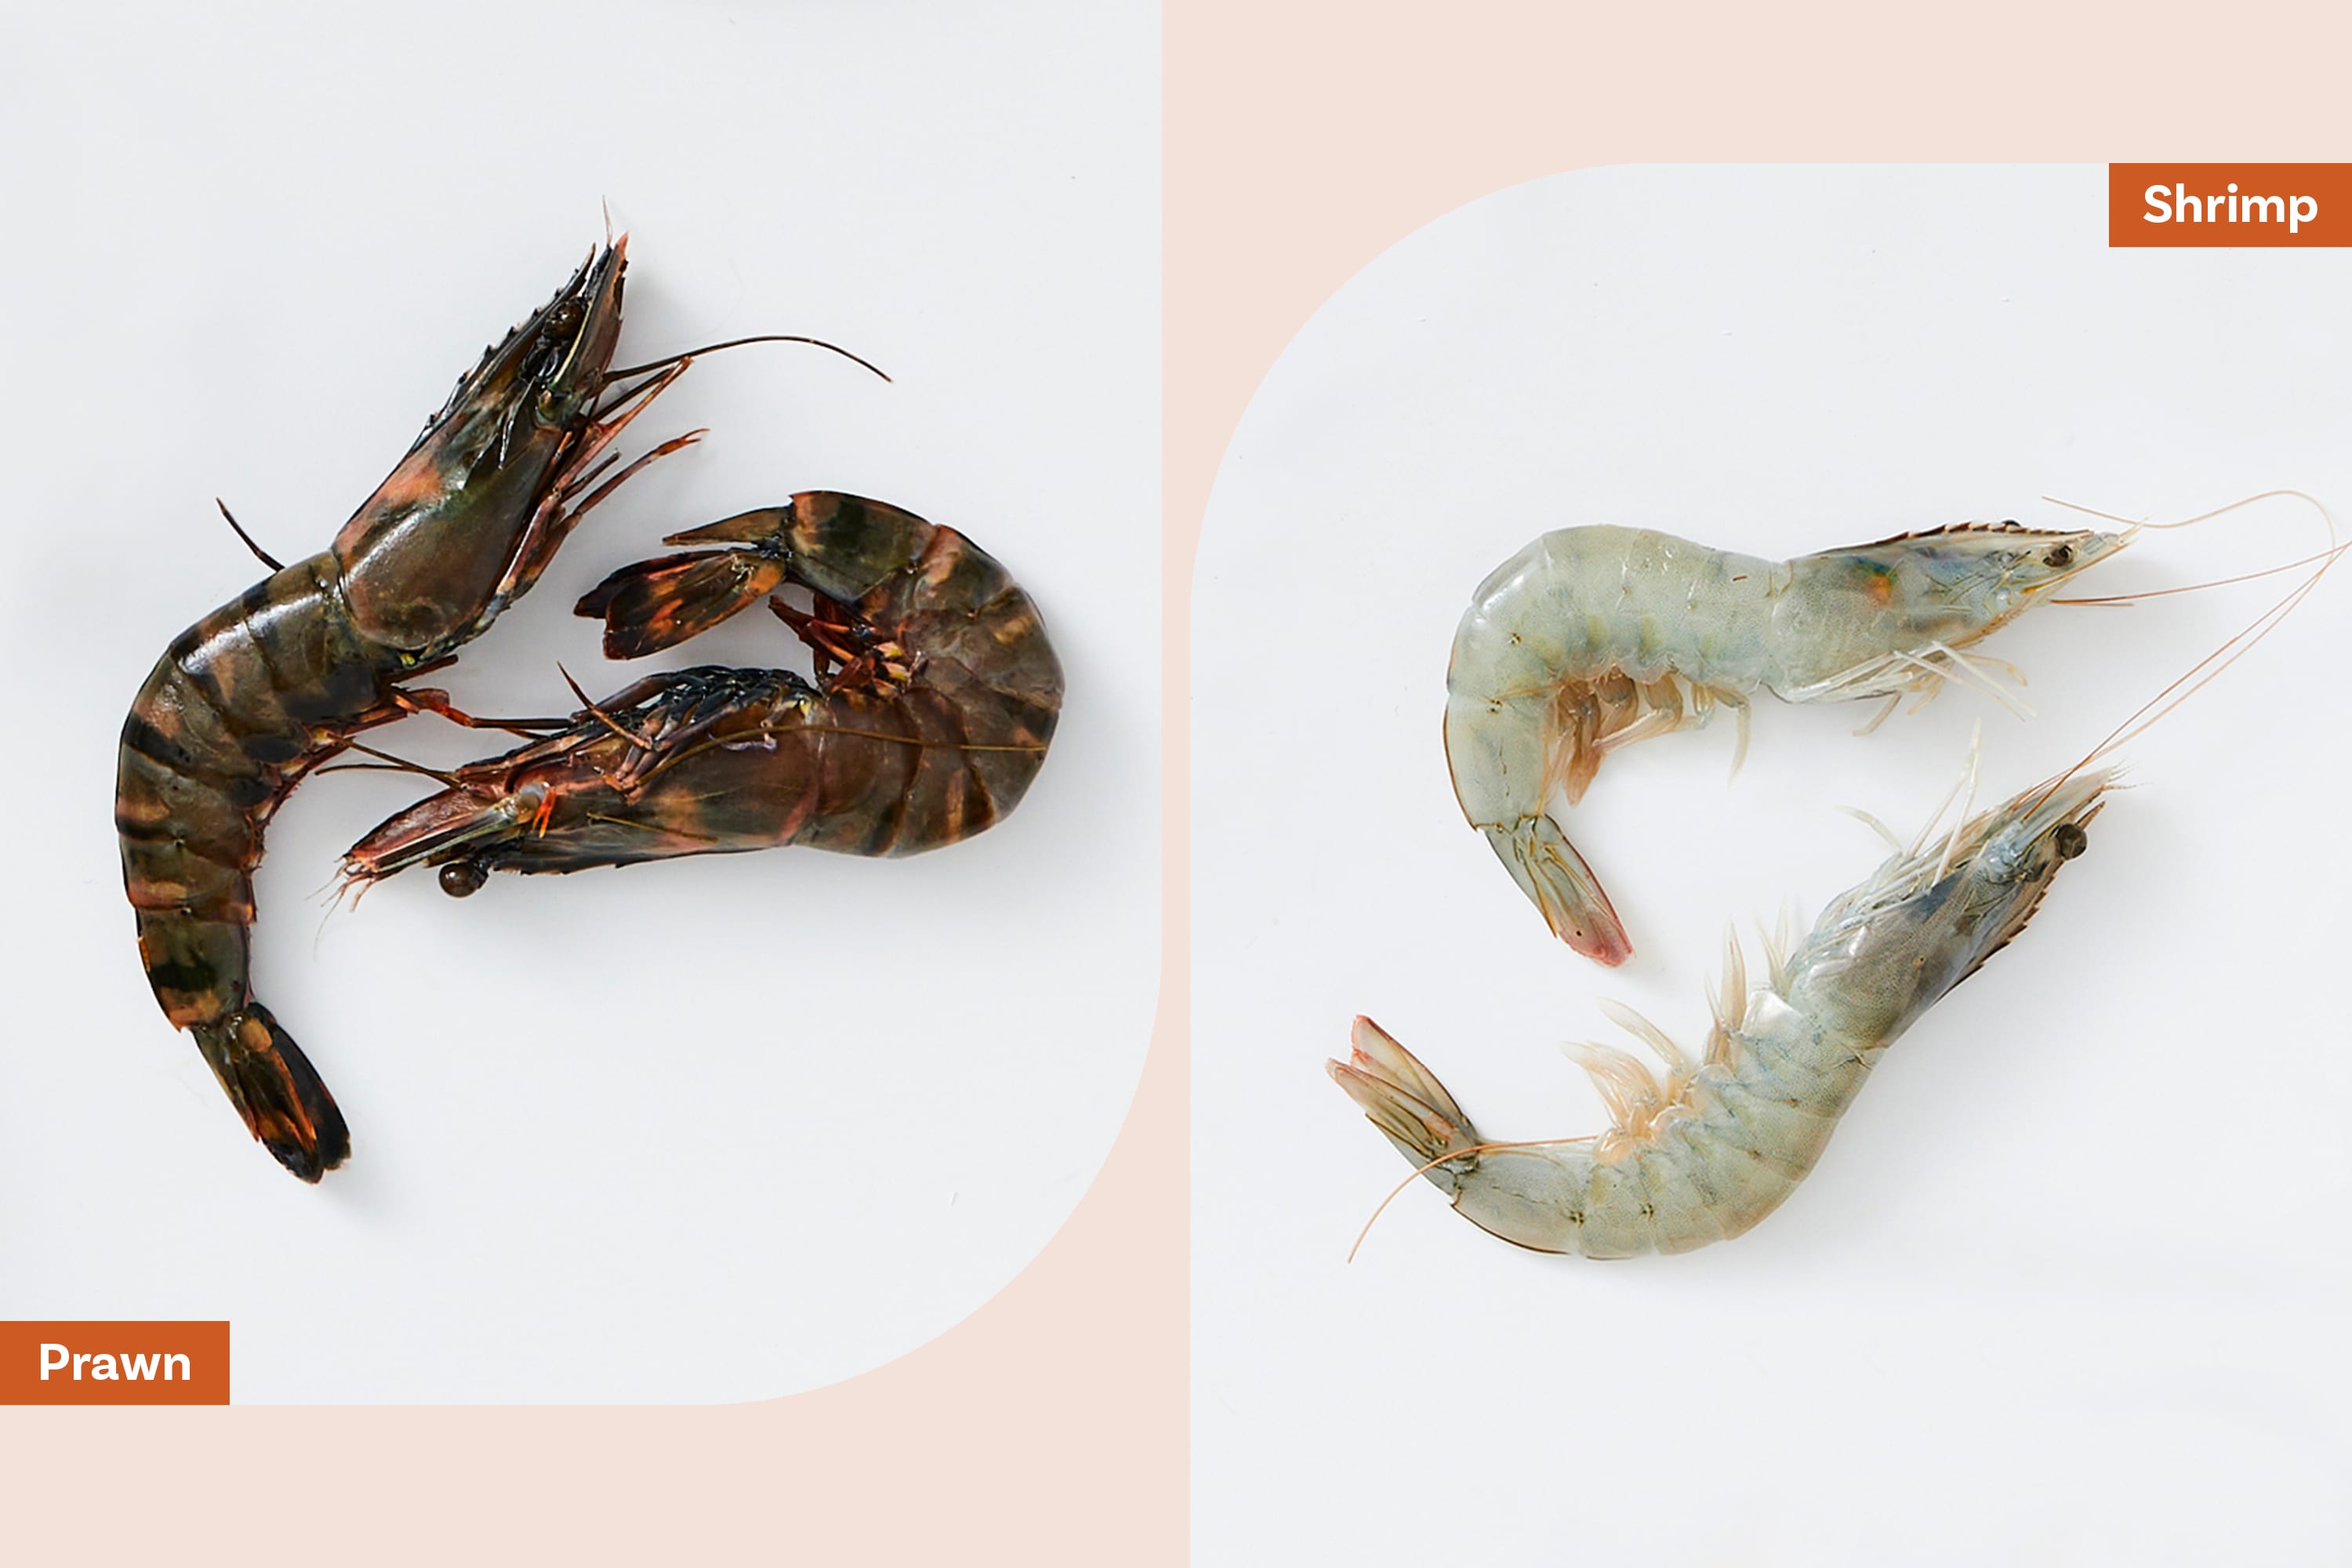 Shrimp Vs Prawns: What's The Difference Between Prawn And Shrimp ...